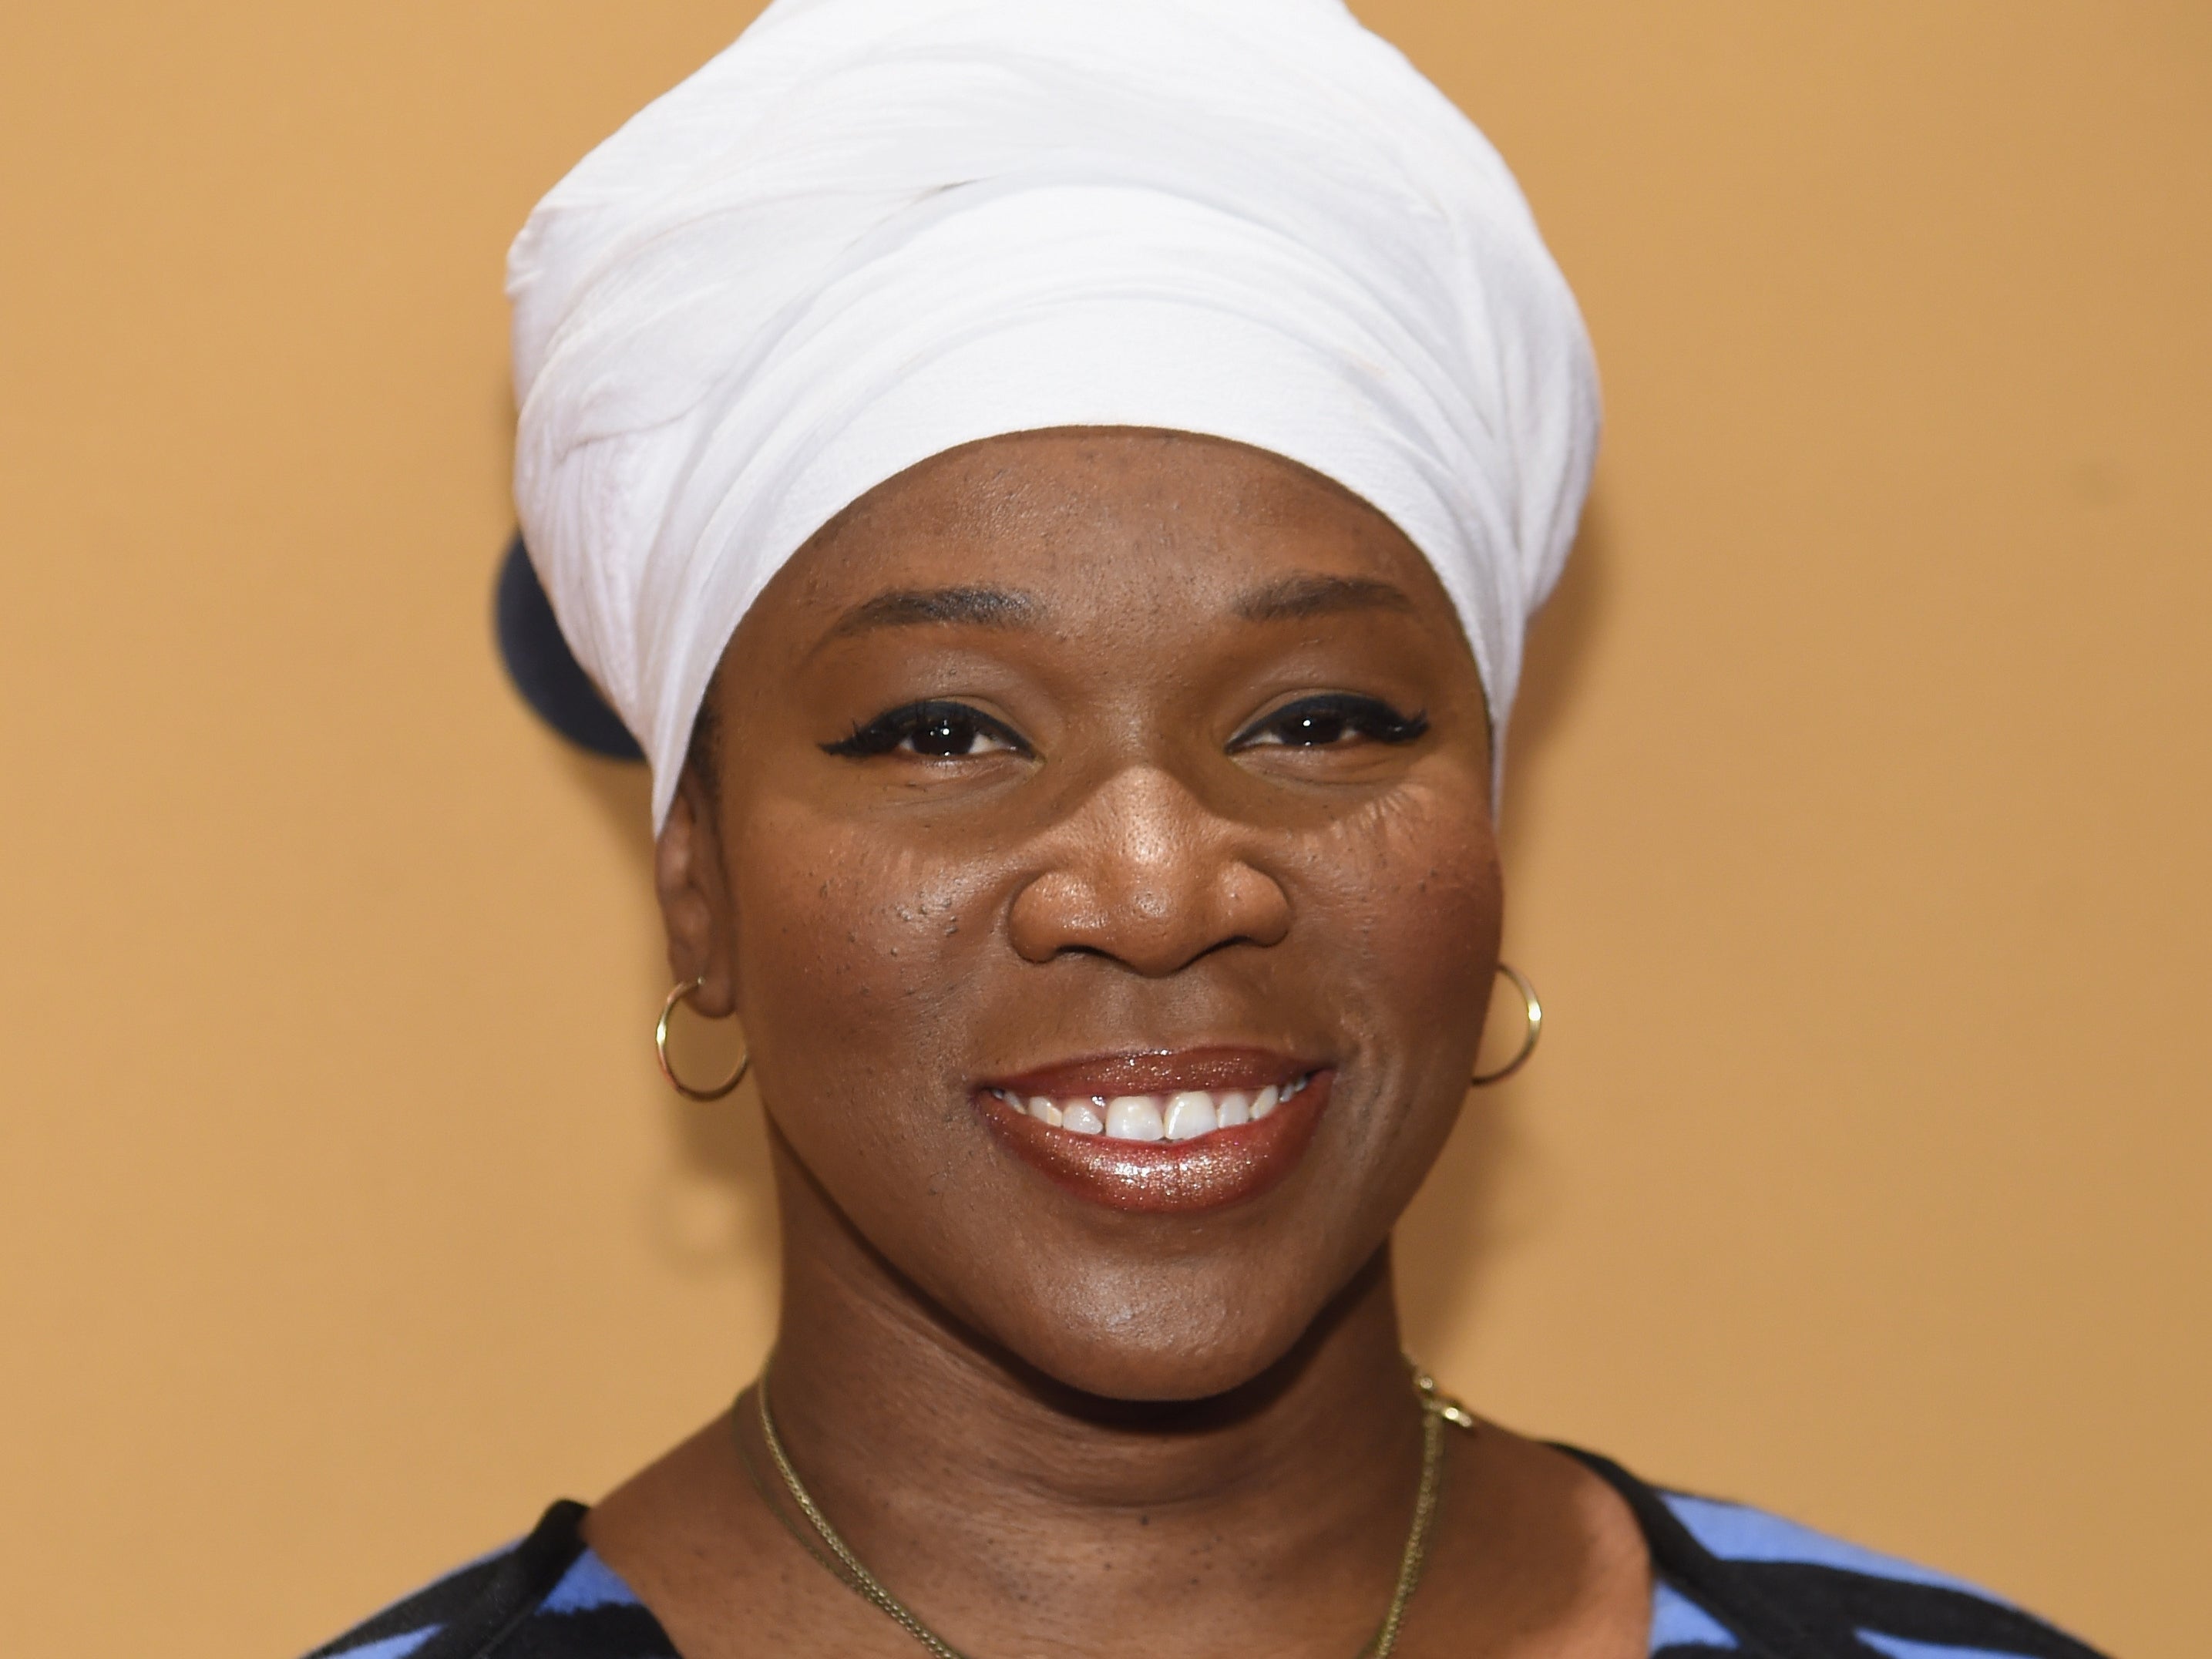 India Arie clarified her stance on Joe Rogan by sharing the clips online